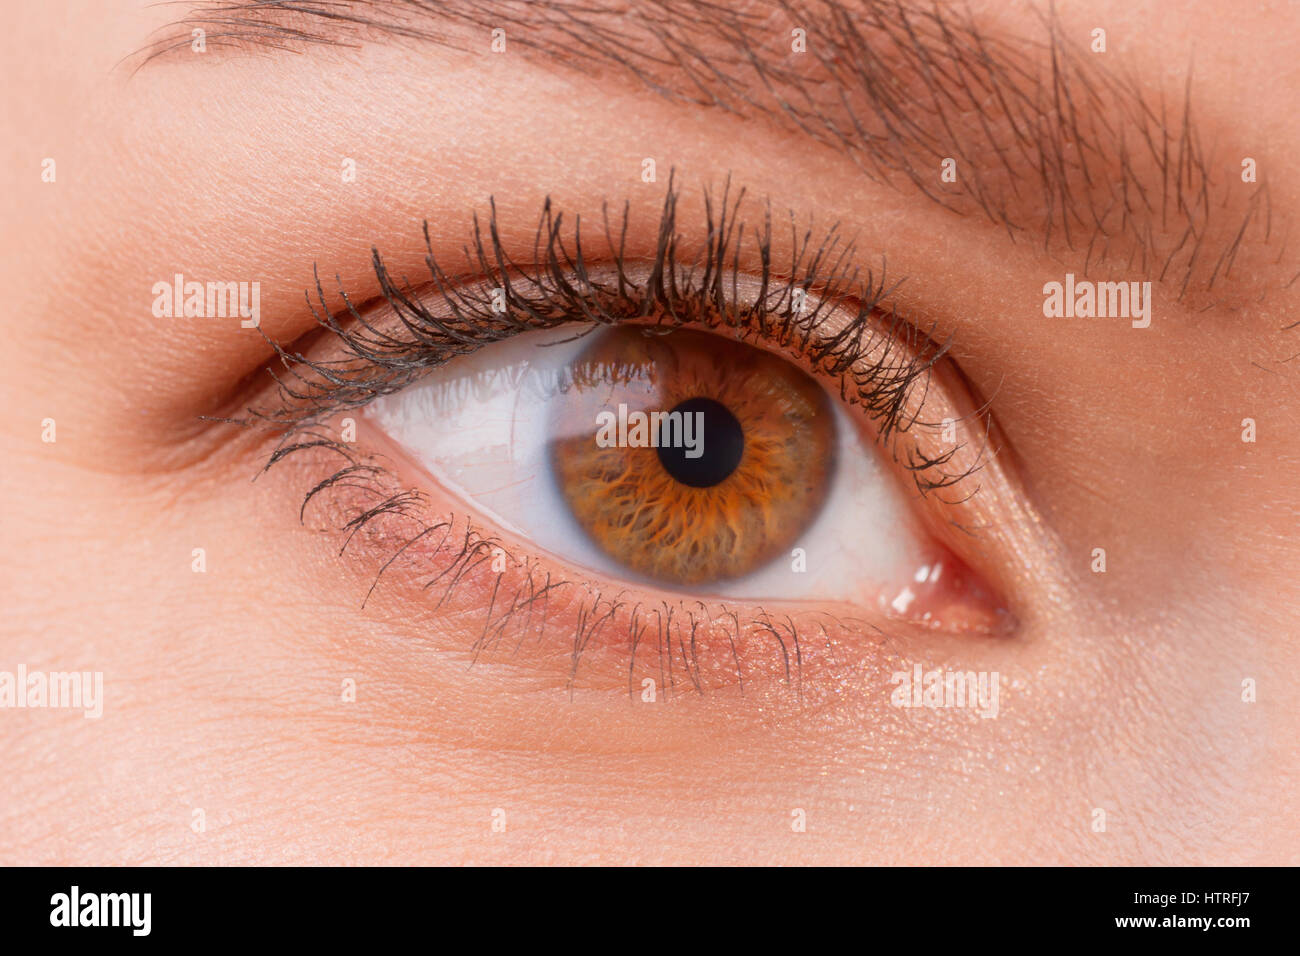 Close up view of brown female eye wearing contact lenses. Good vision, vision correction or observation concept Stock Photo